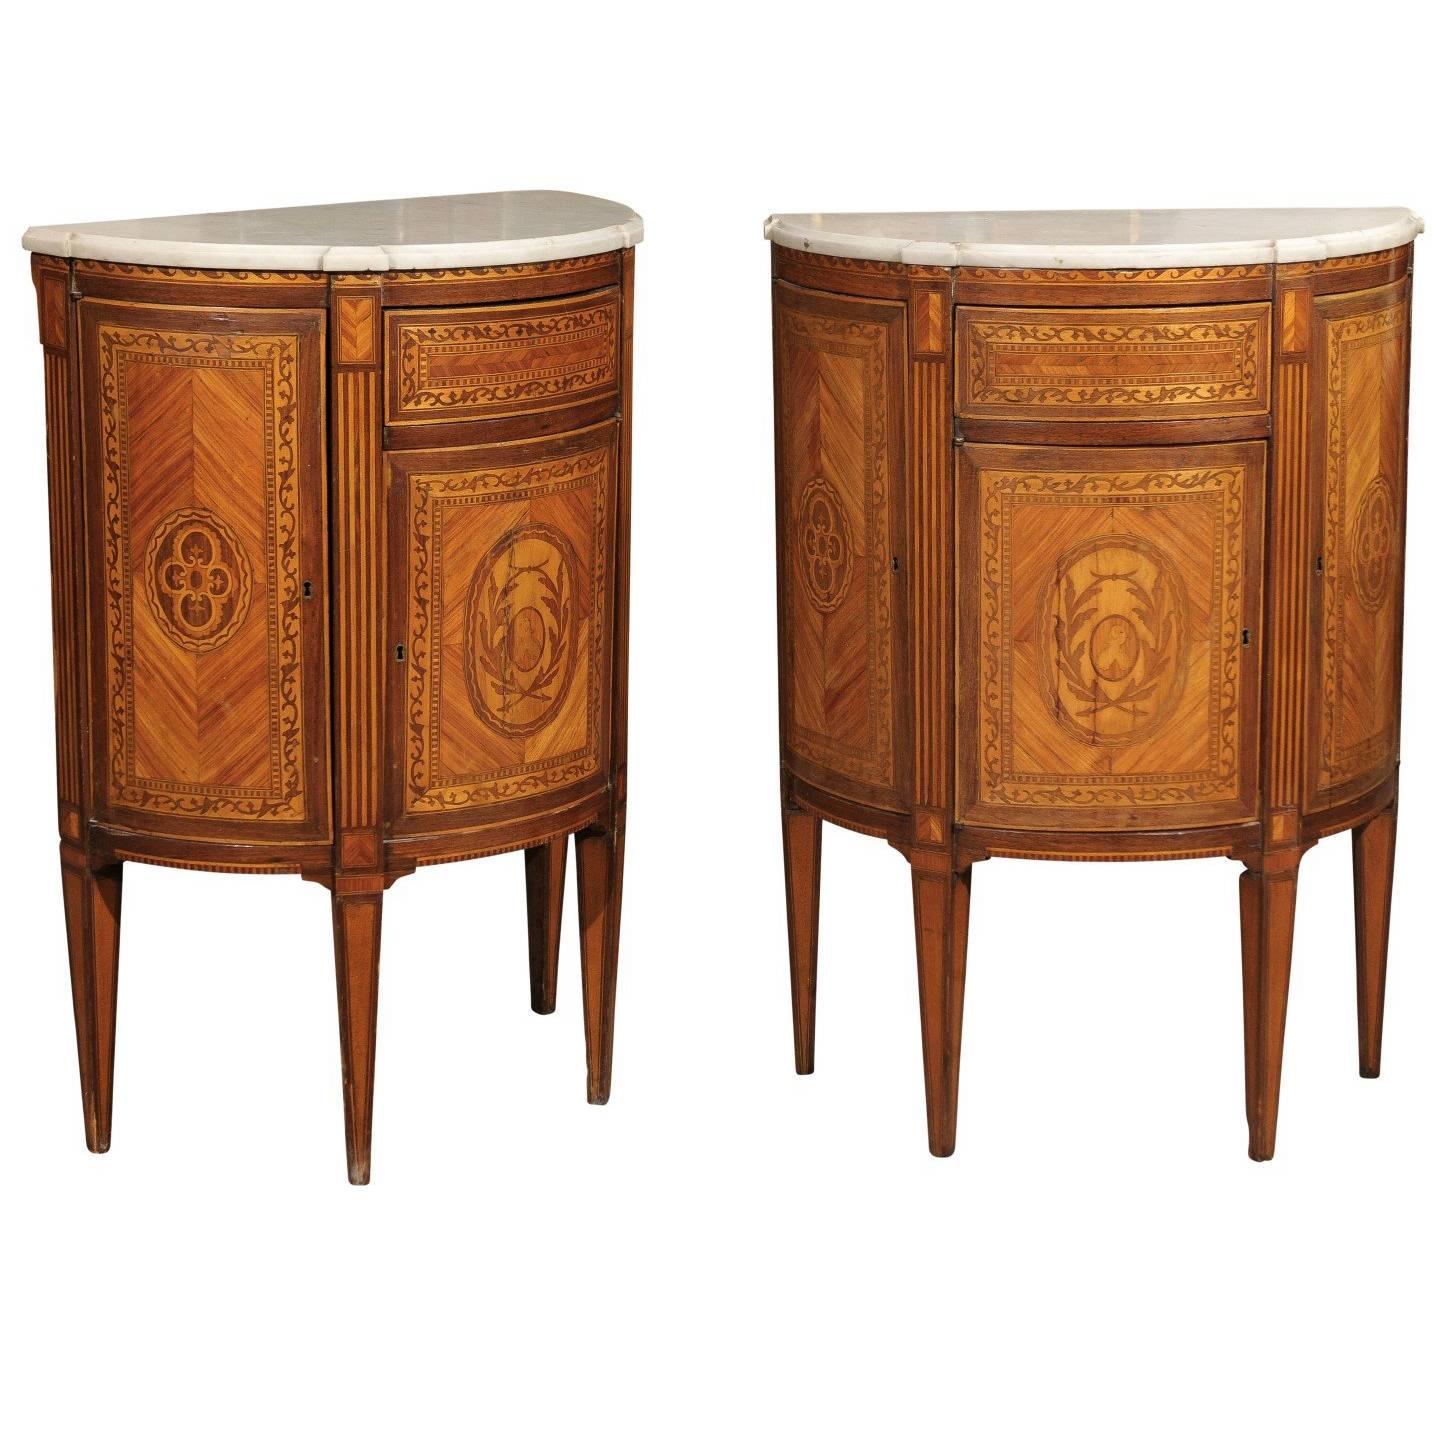 Pair of Neoclassical Style Italian Inlaid Demilunes with Marble Tops, circa 1940